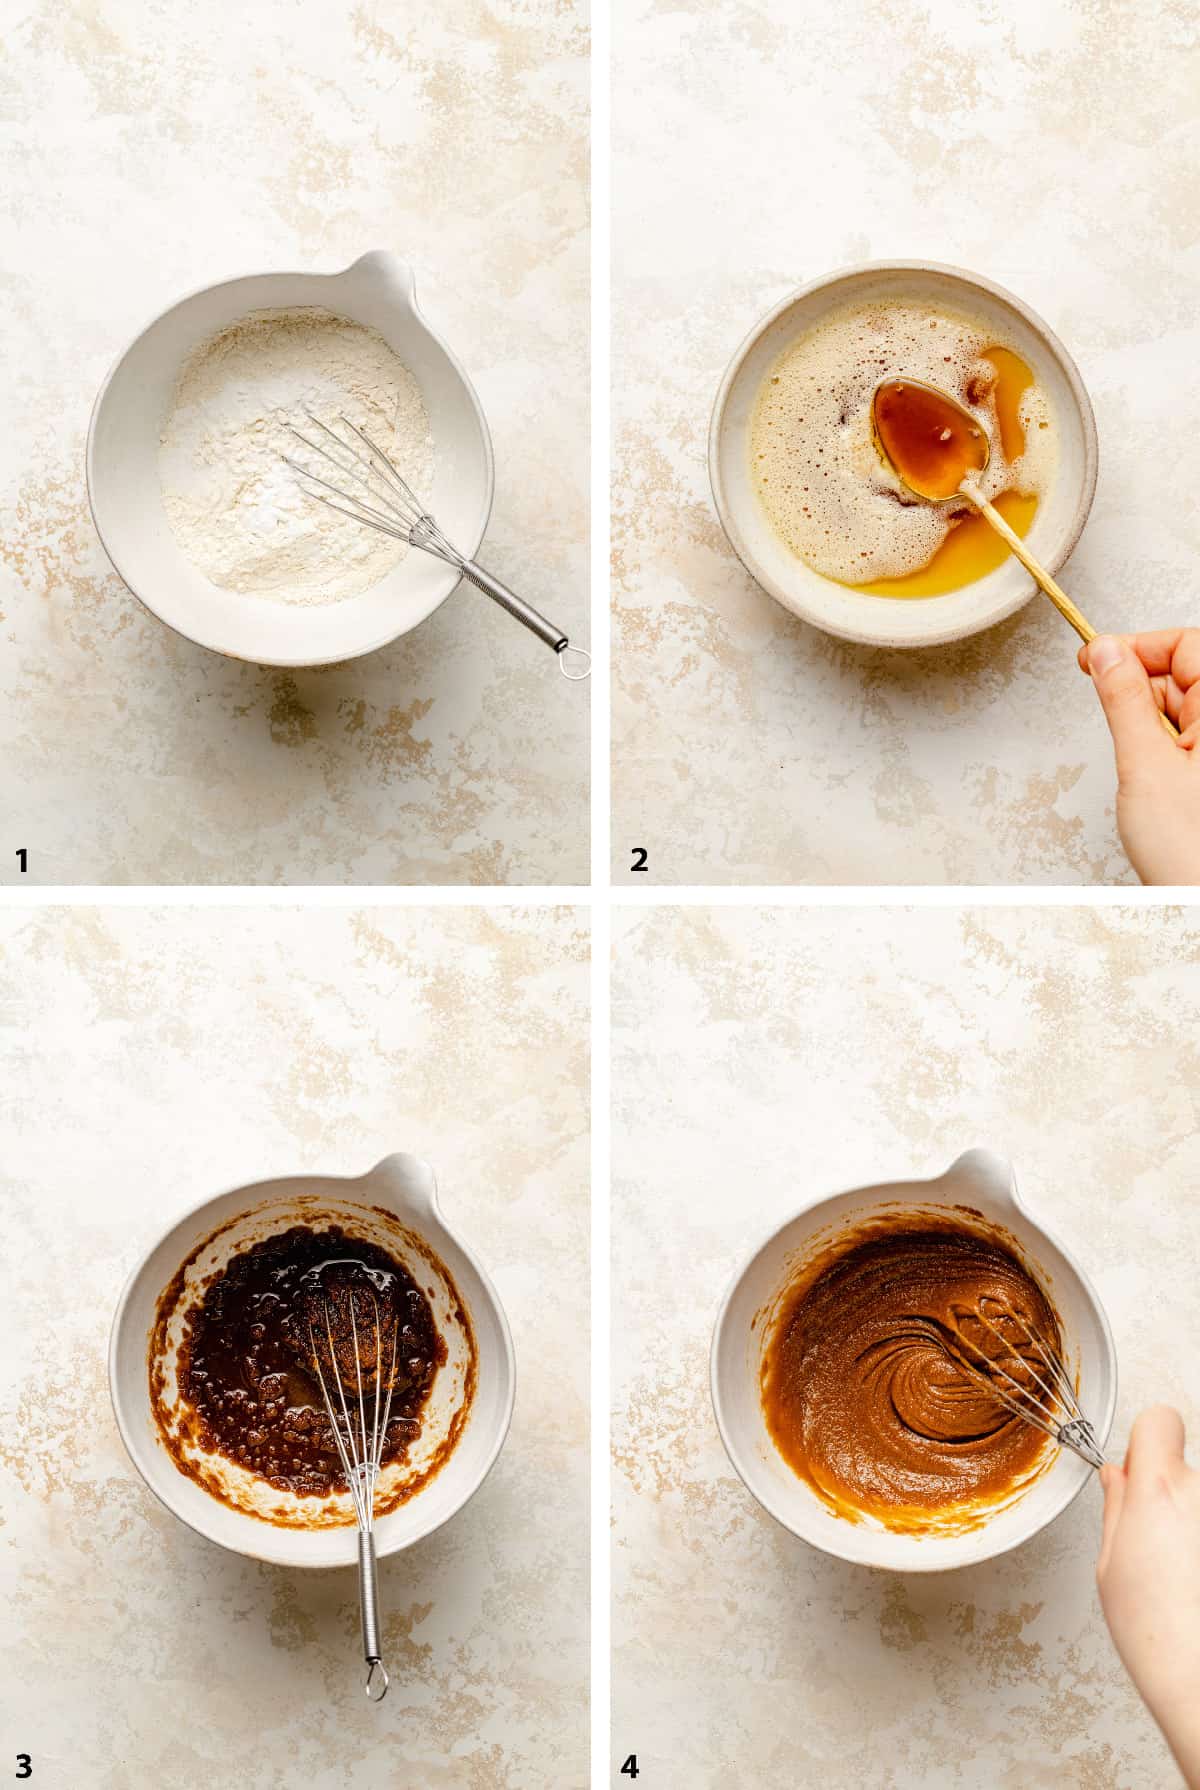 Process steps of mixing dry ingredients, browning butter, mixing butter and sugar and whisking in egg. 